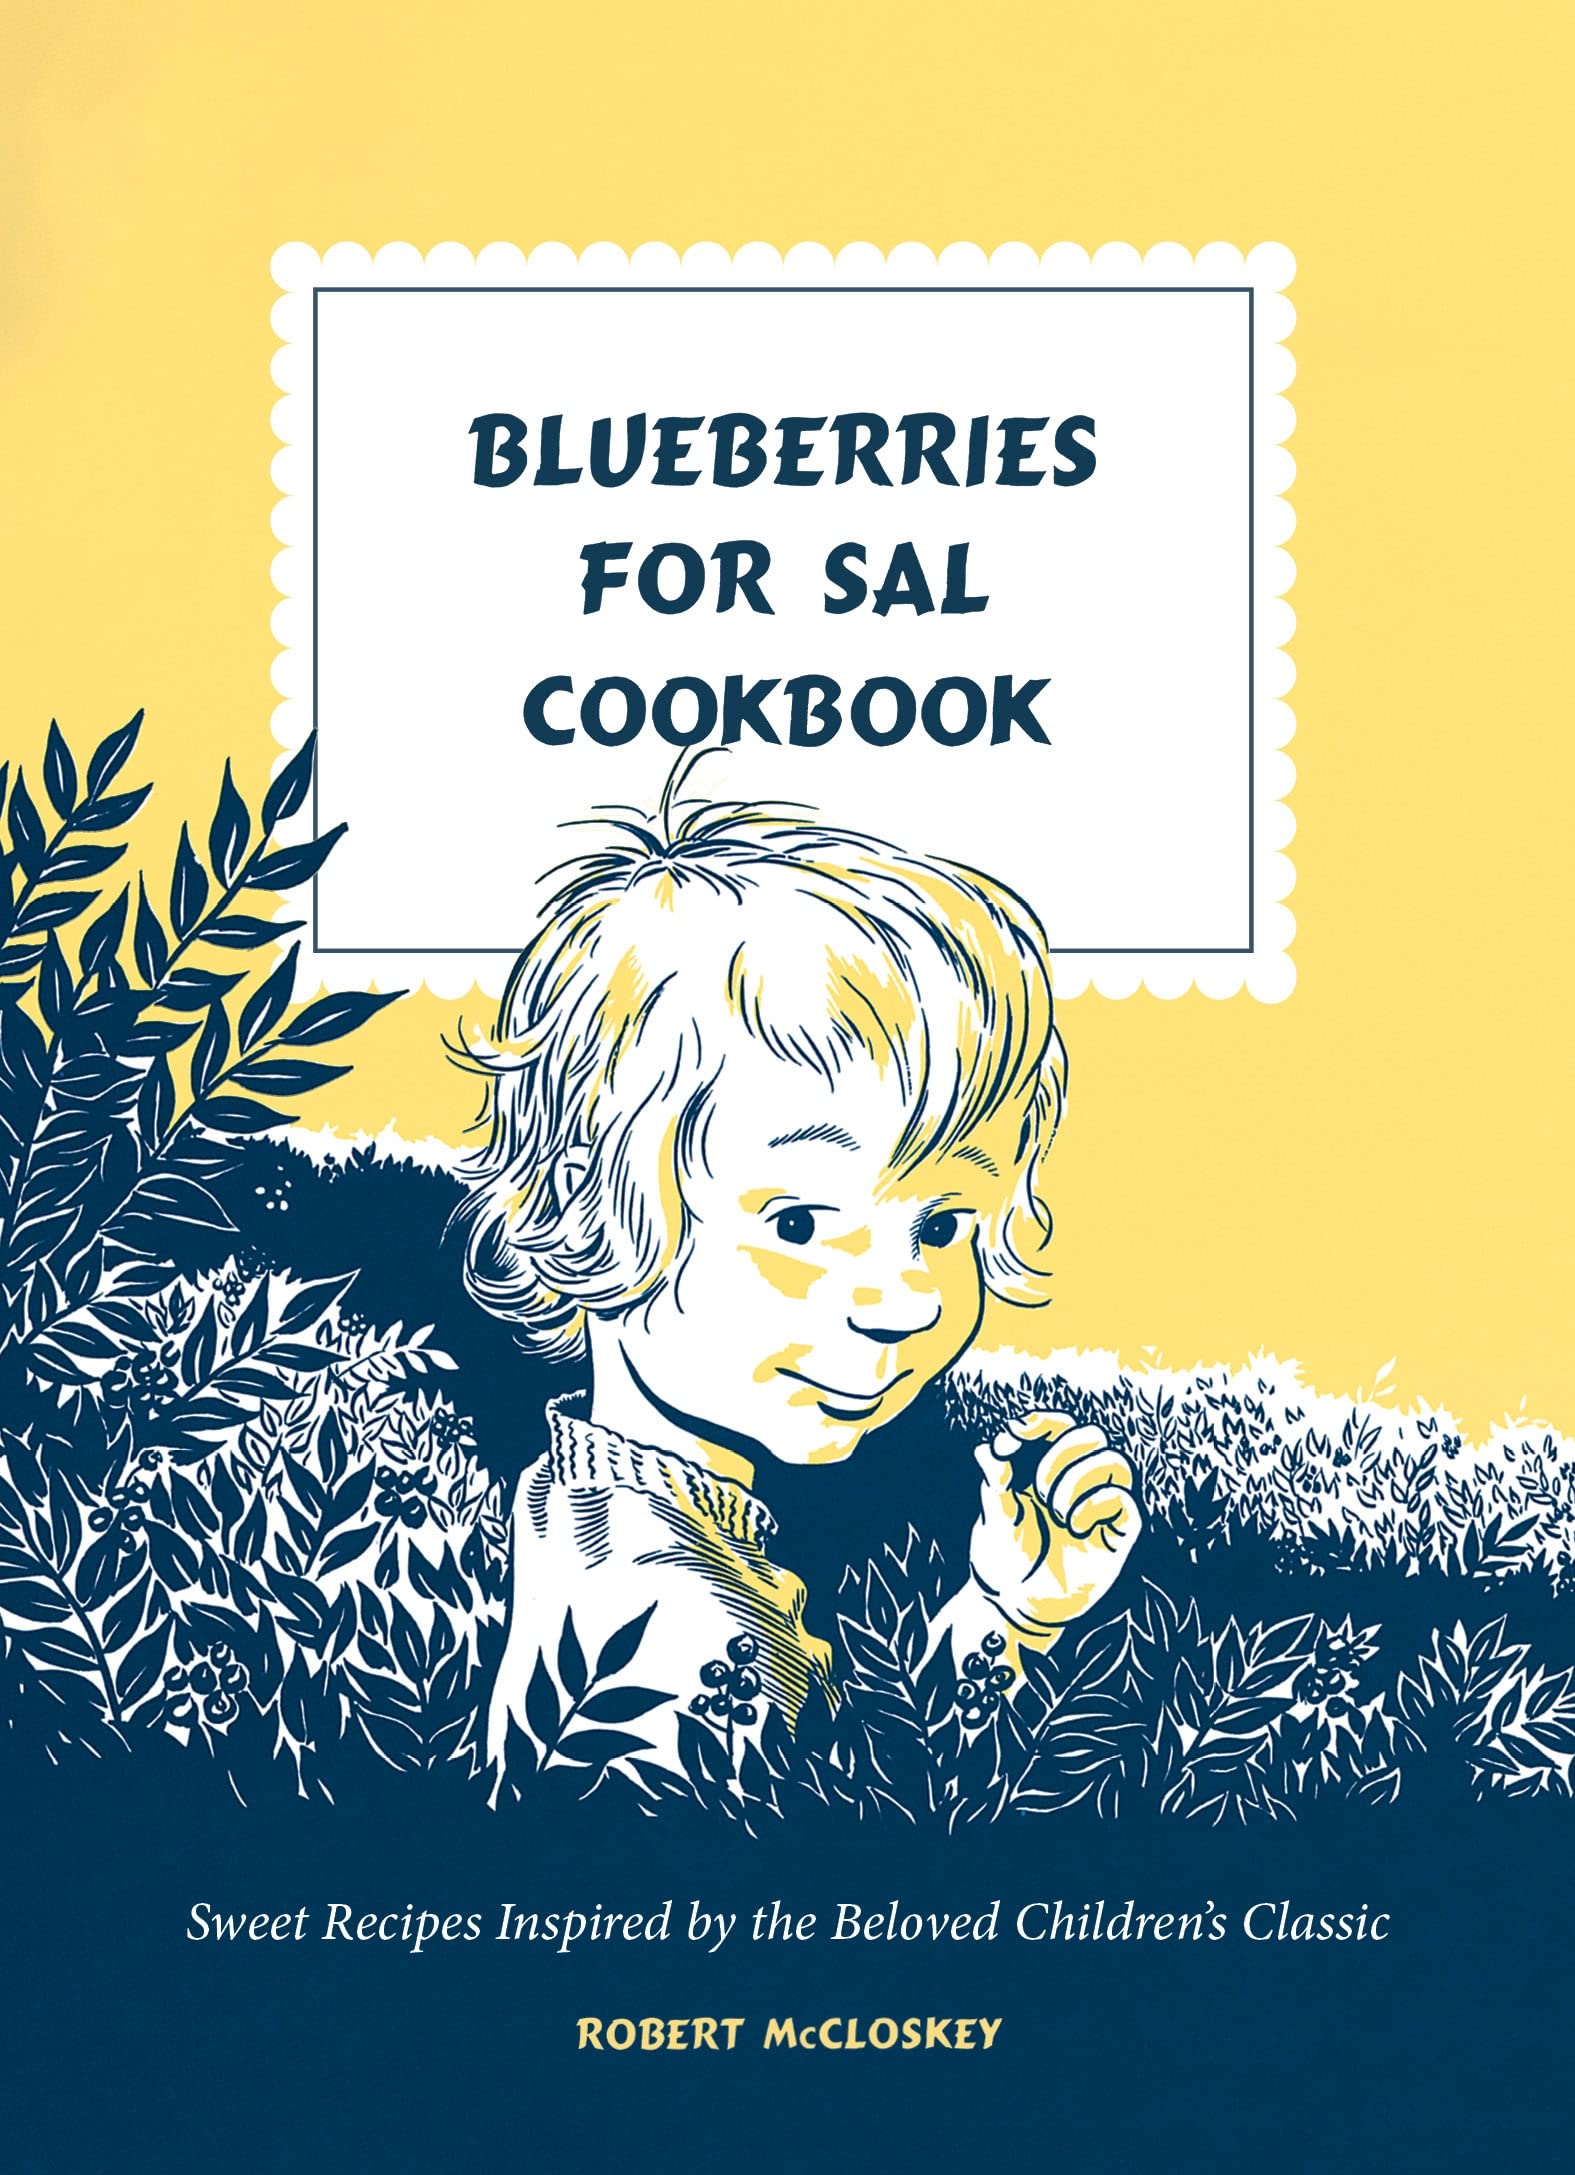 Illustration of a small girl in blueberry bushes eating berries